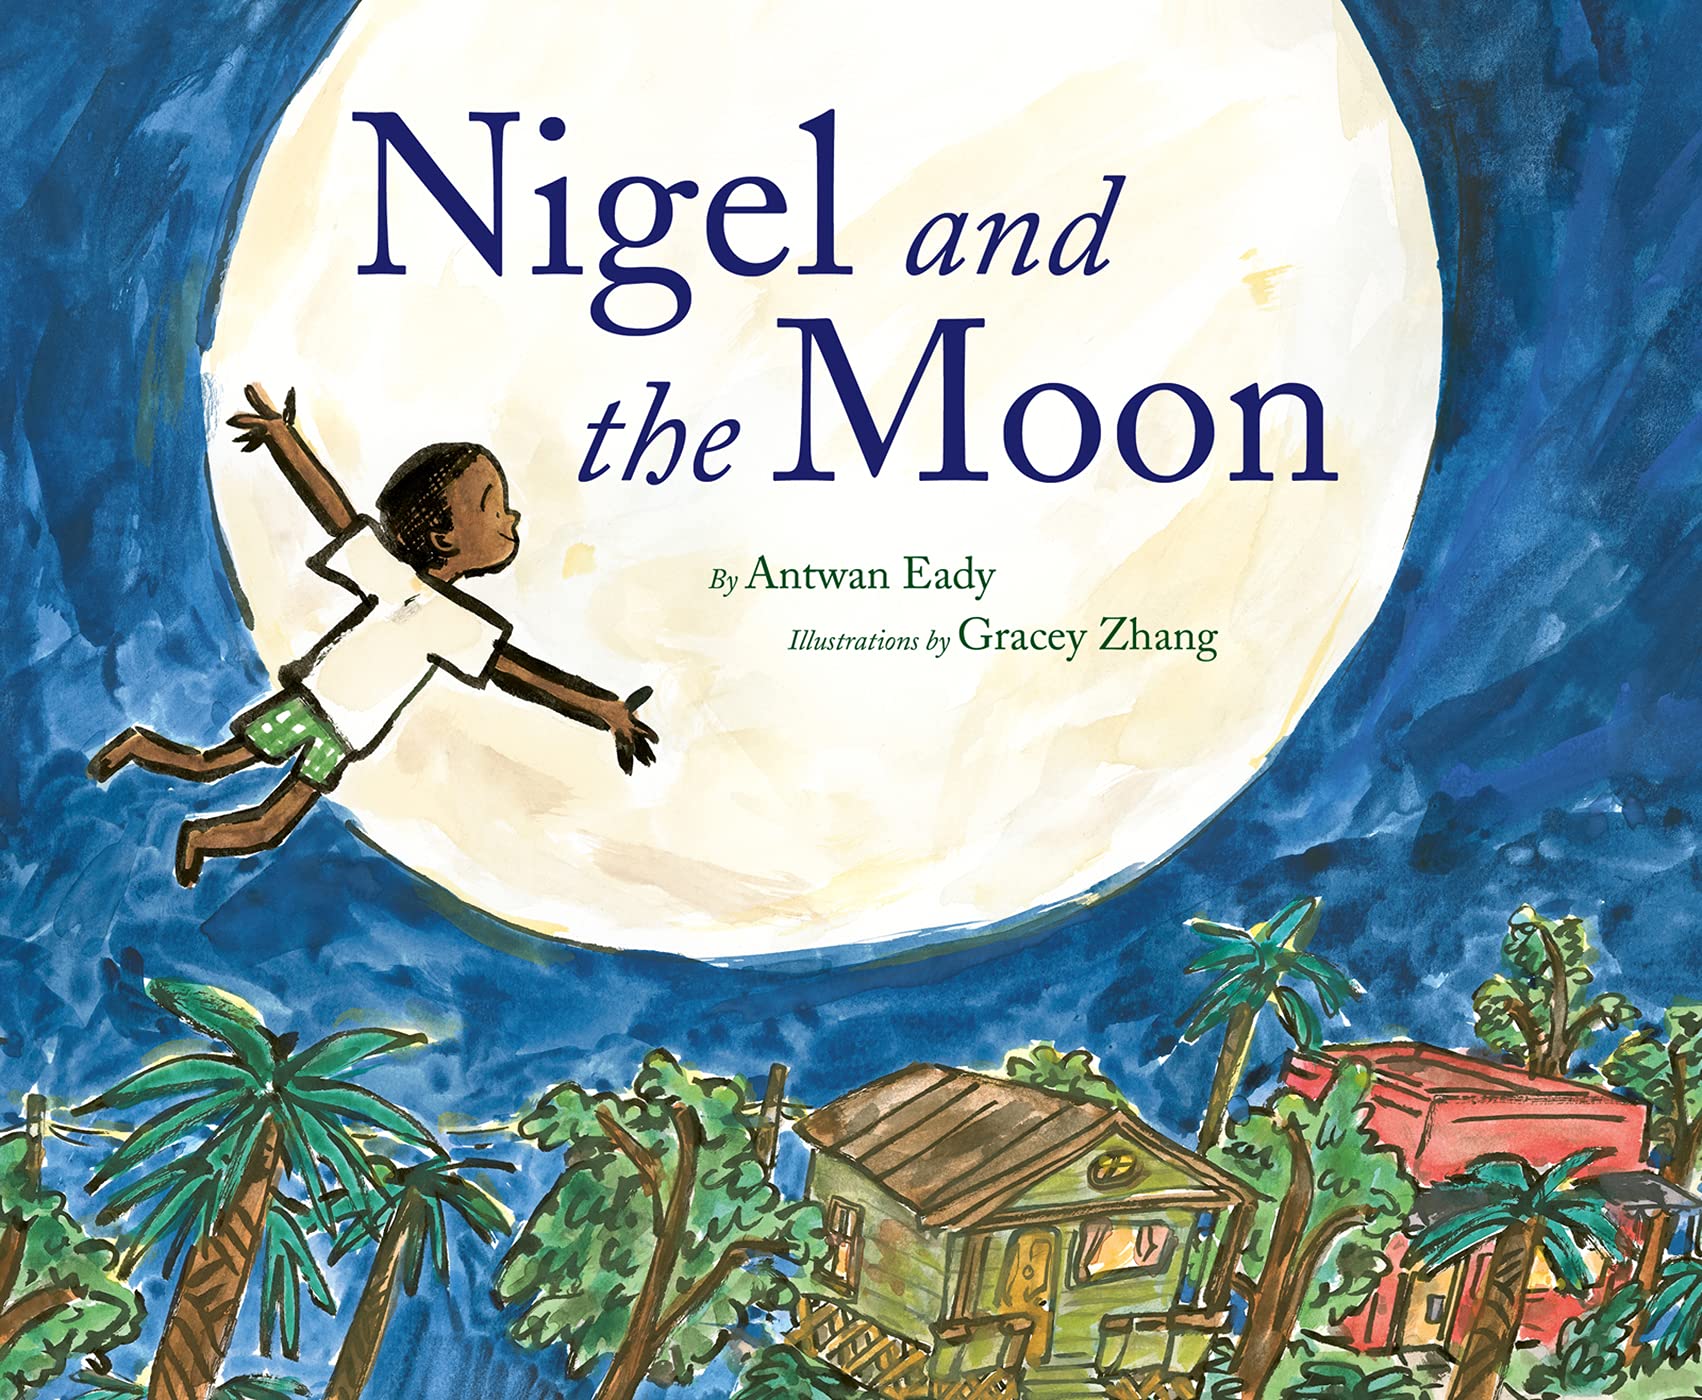 Image for “Nigel and the Moon”